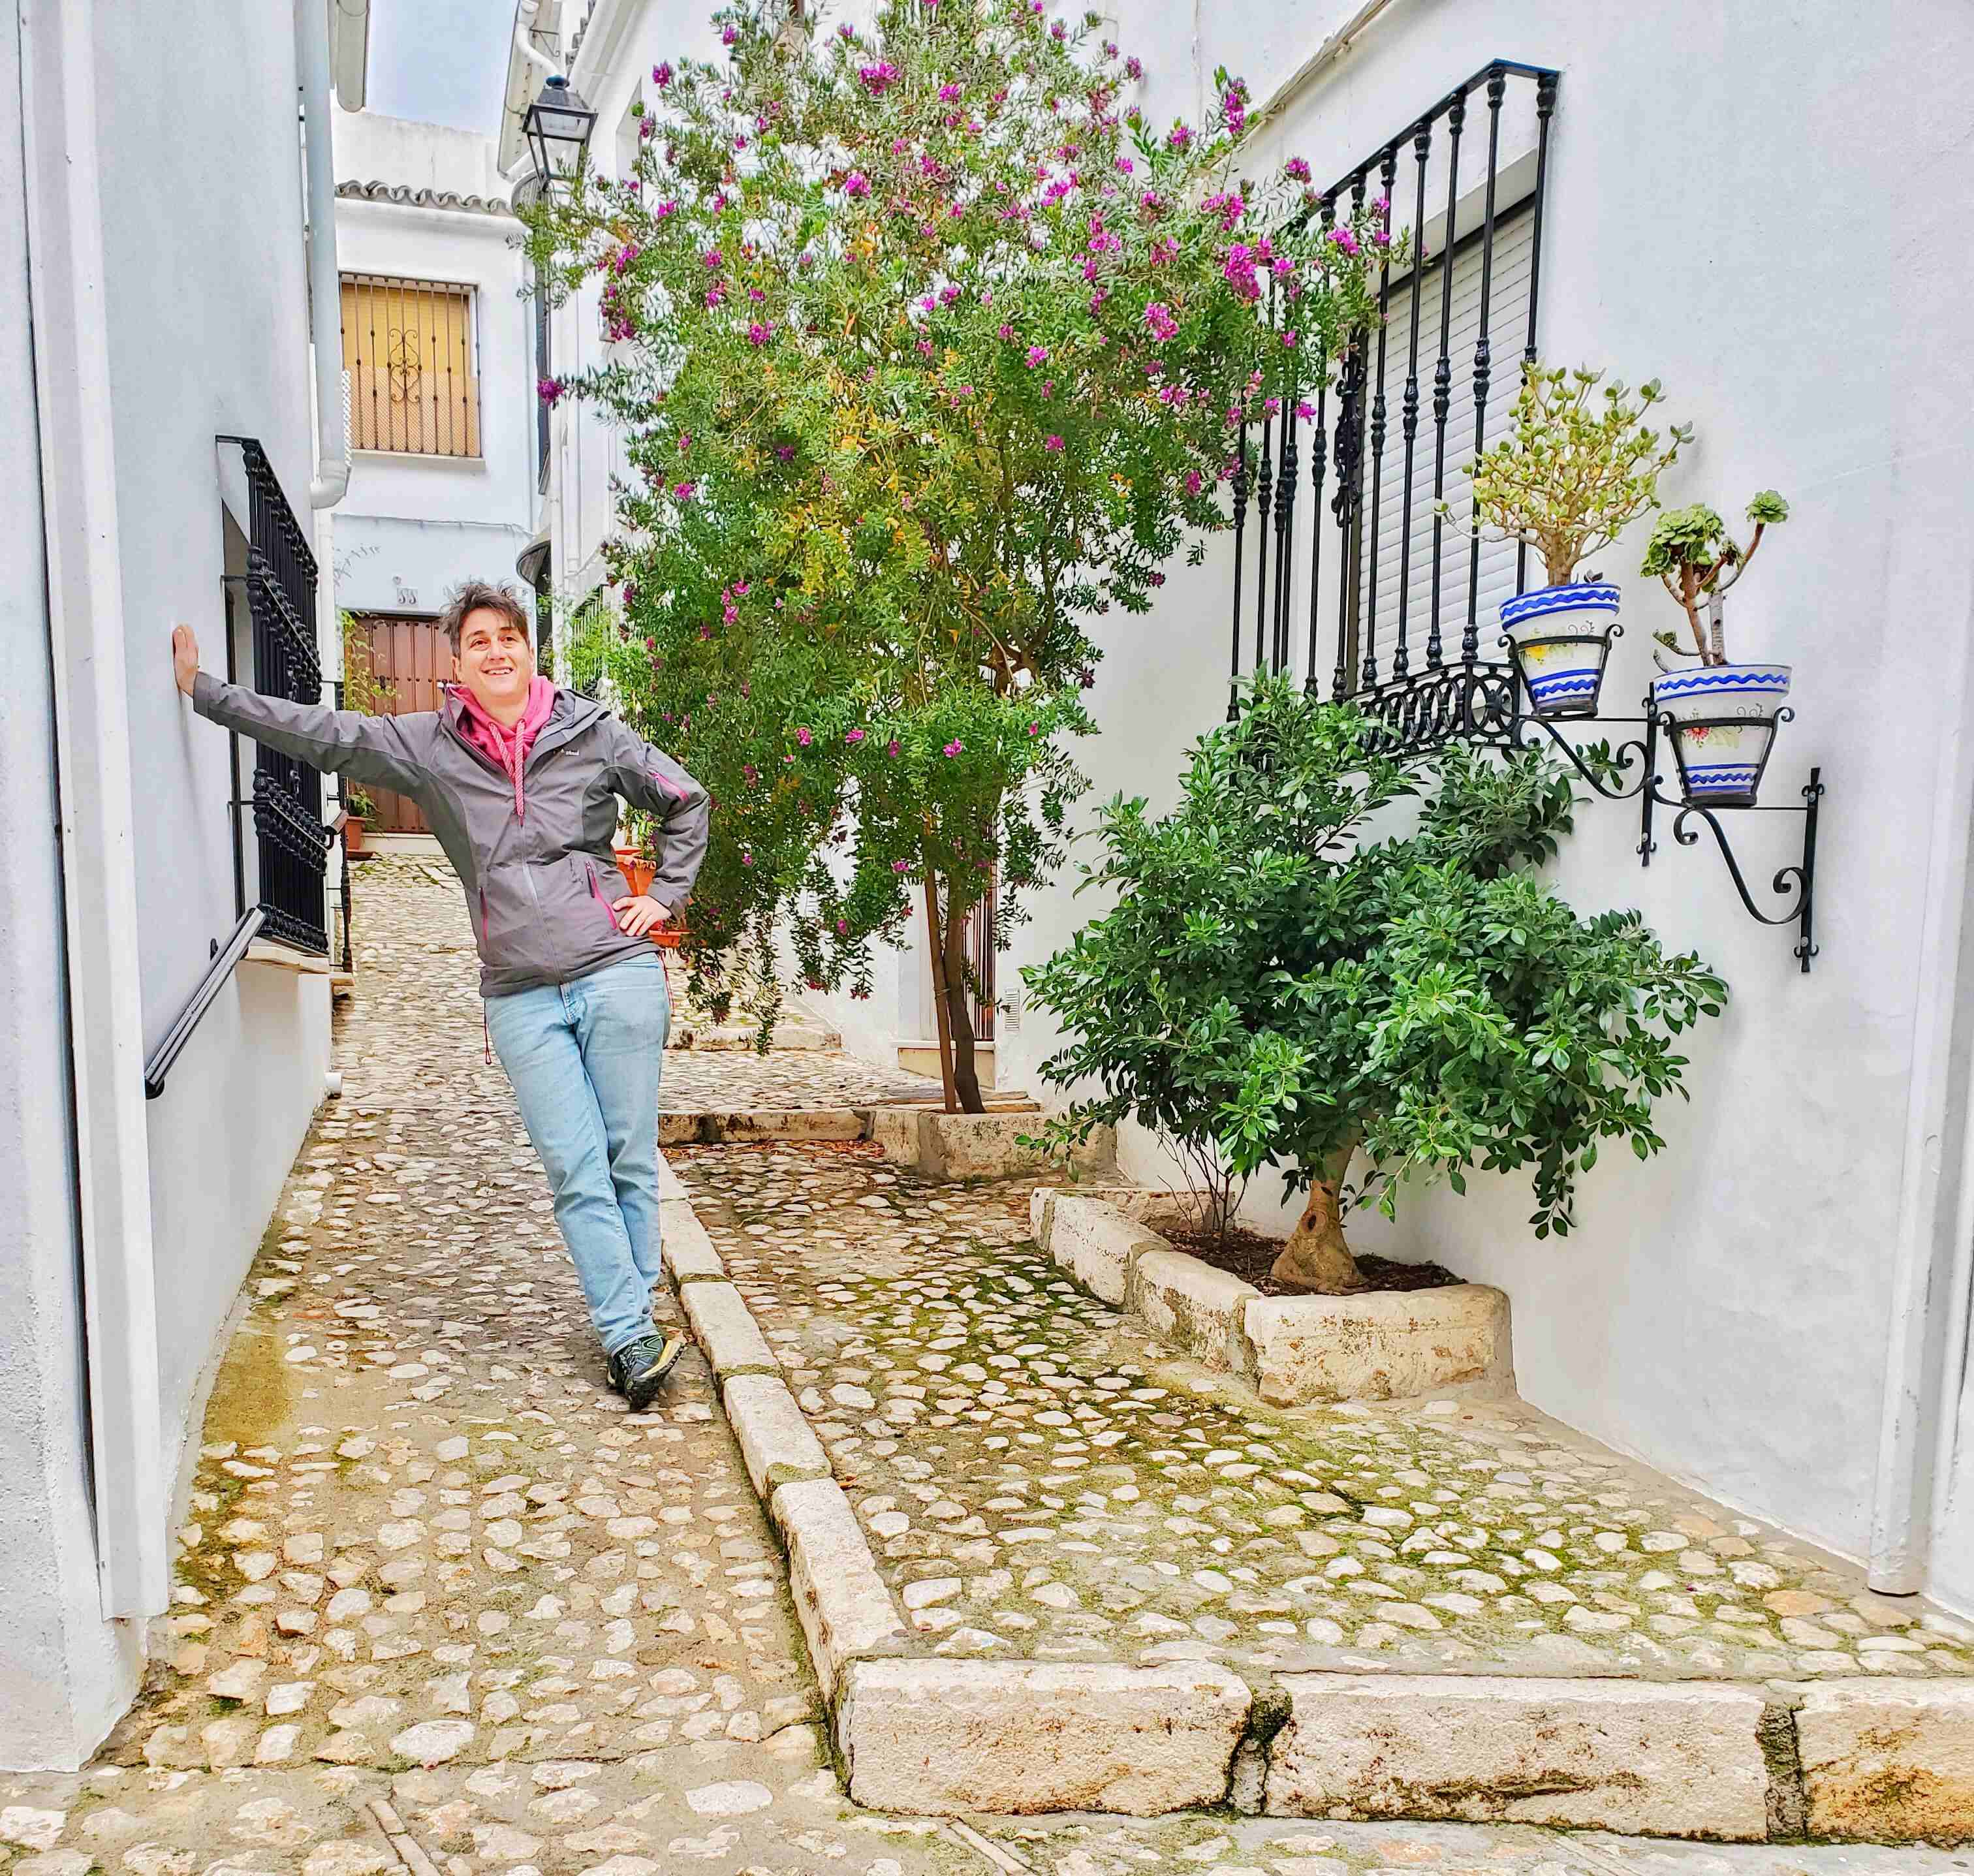 Person in jeans and grey jacket leaning on white wall in small alley way with two trees nearby